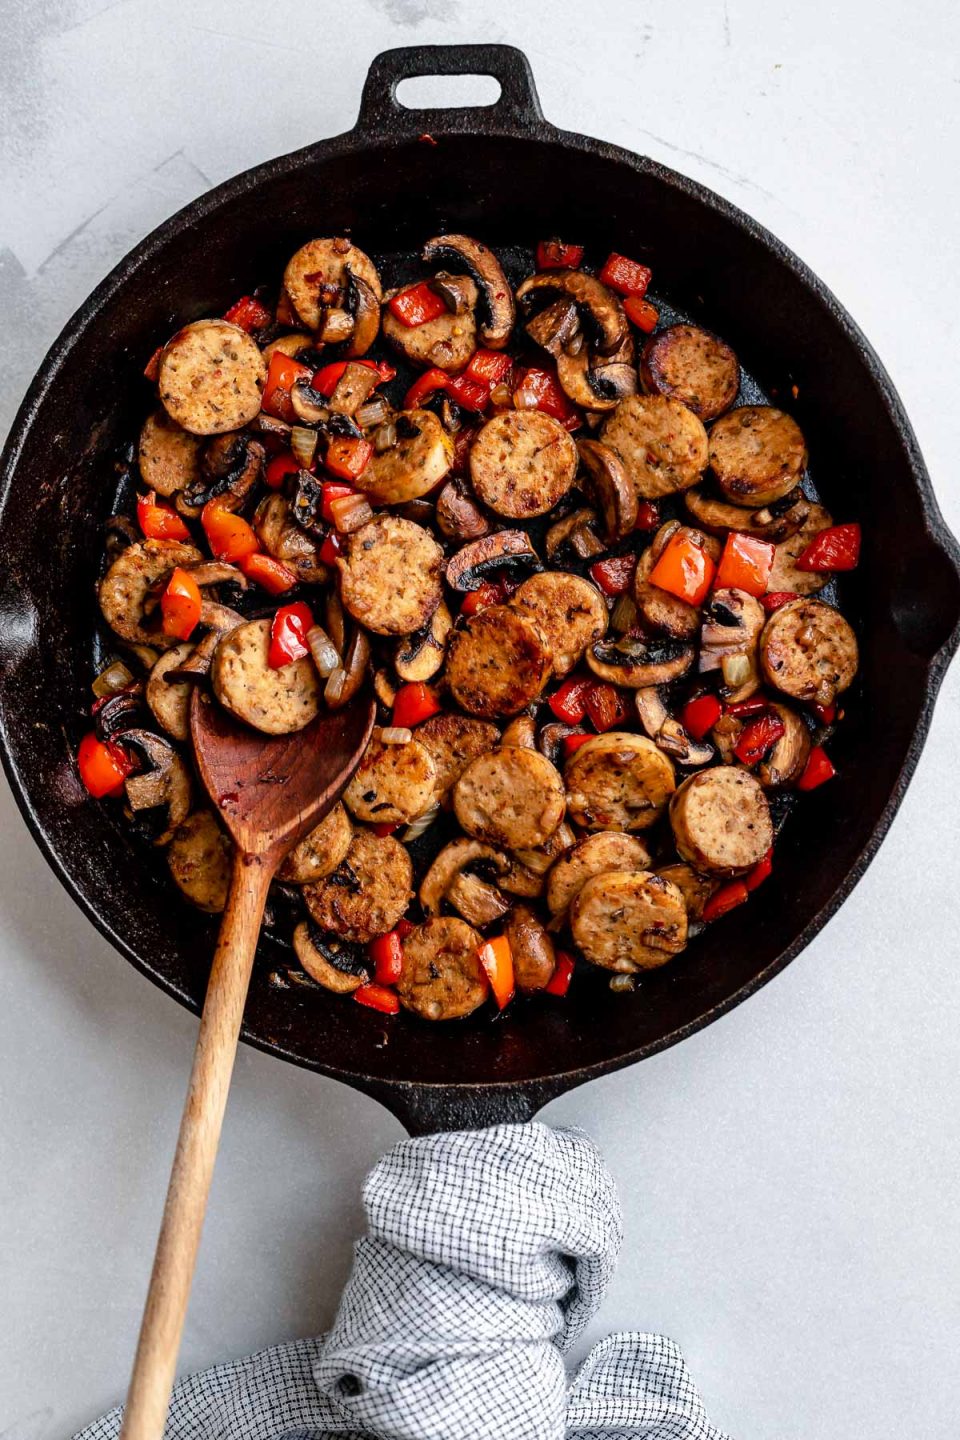 How to make Italian chicken sausage and quinoa skillet, Step 1 & 2: cook the aromatics & brown the sausage and mushrooms. A large black cast iron skillet sits atop a creamy white textured surface and is filled with softened onion and bell peppers, browned Italian chicken sausage and baby portobello mushrooms. A wooden spoon used for stirring rests inside of the skillet and a blue and white plaid linen napkin is wrapped around the skillet handle.